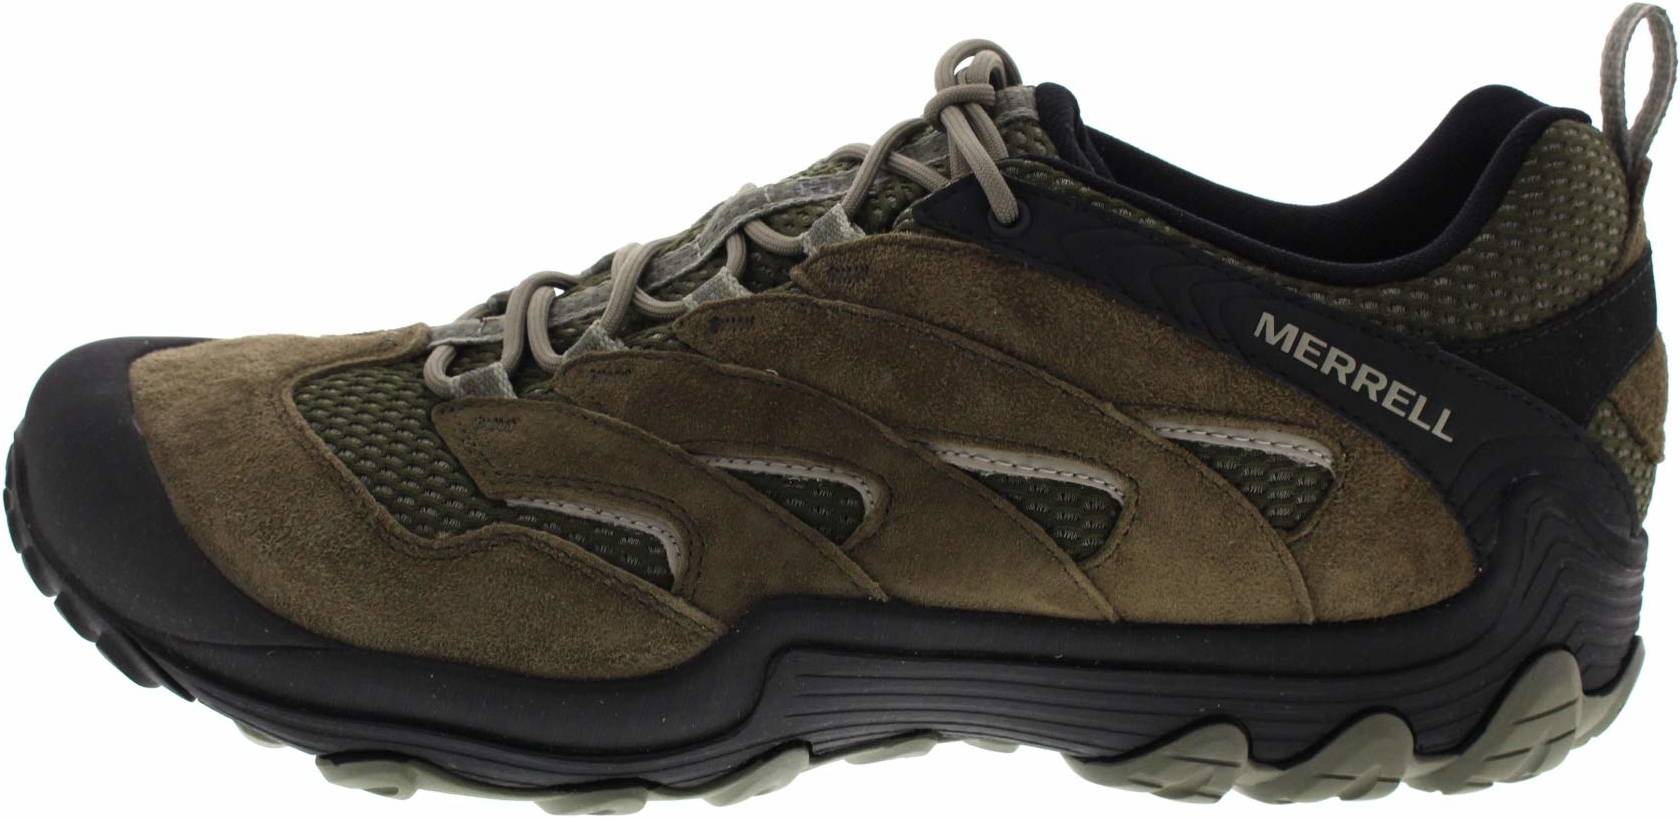 MERRELL Chameleon 7 J31175 Outdoor Hiking Trekking Athletic Trainers Shoes Mens 